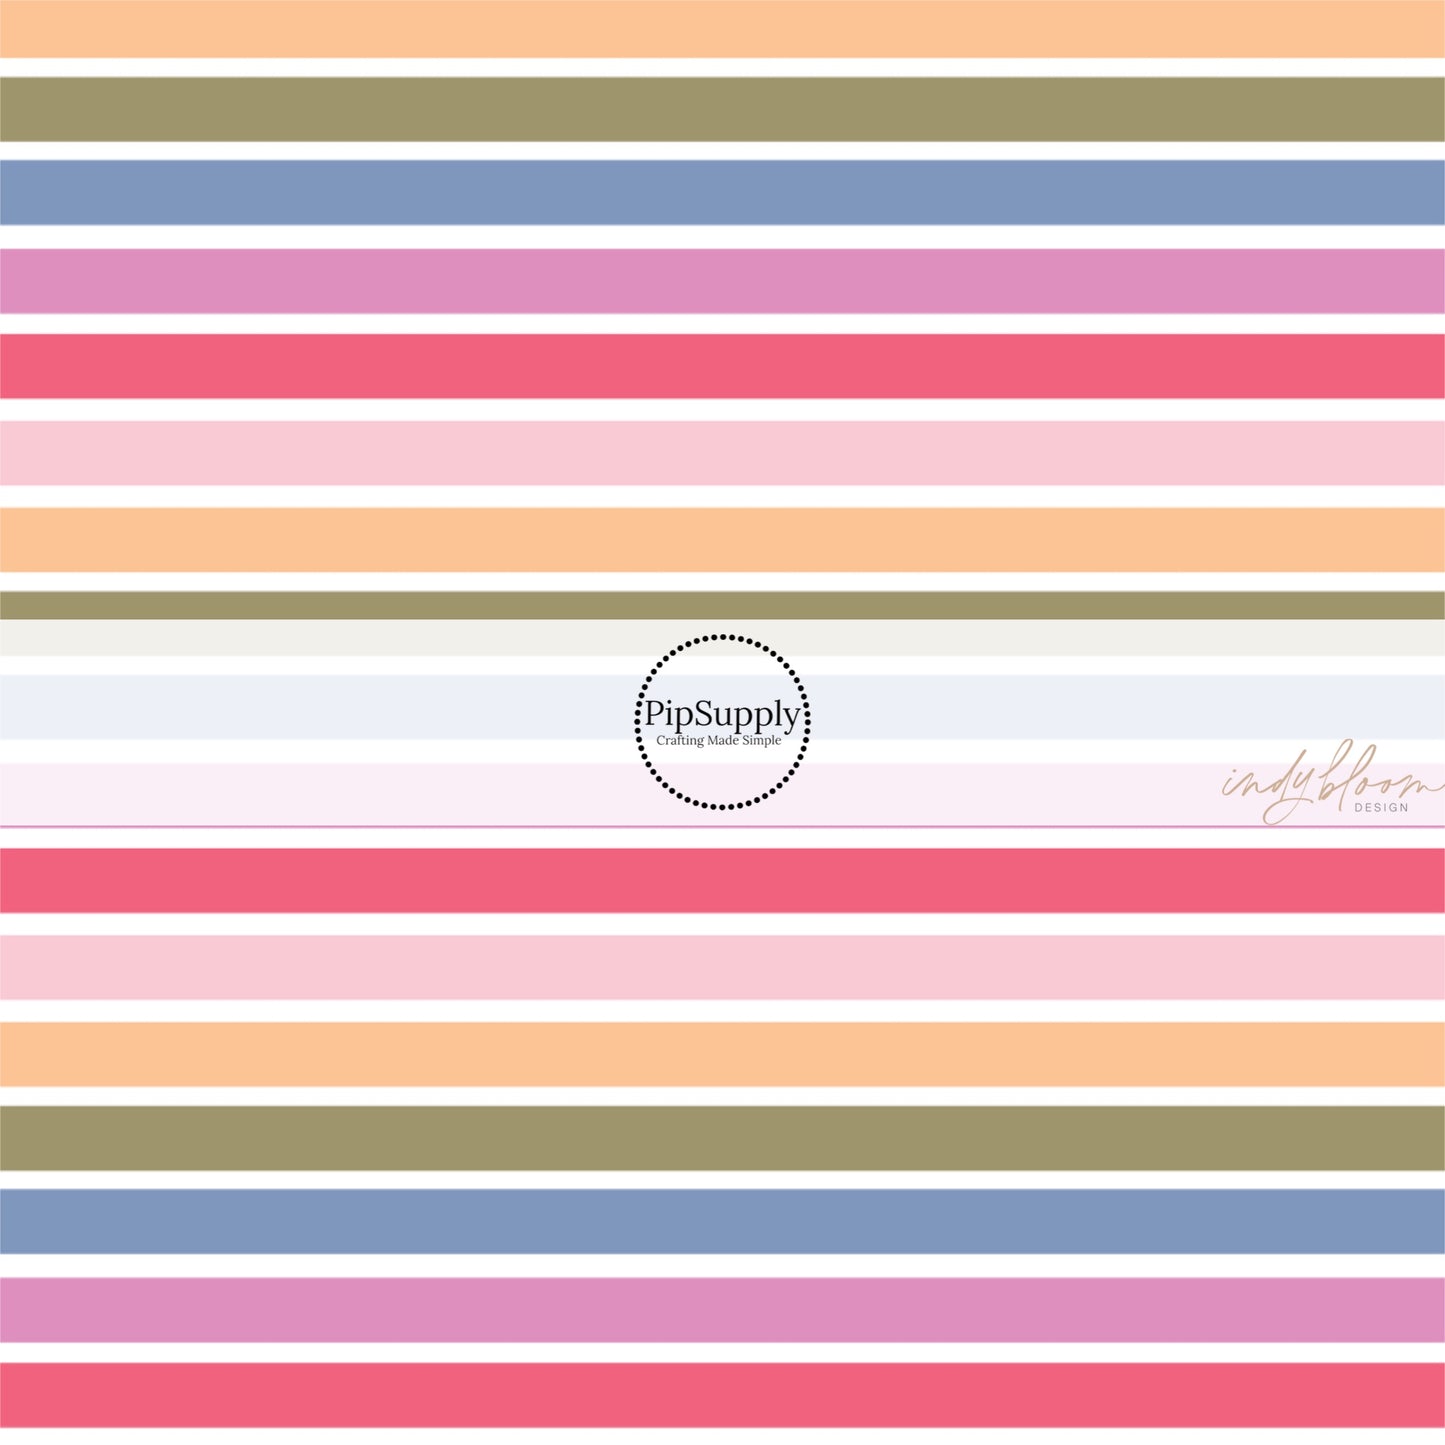 This summer fabric by the yard features colorful stripes on cream. This fun summer themed fabric can be used for all your sewing and crafting needs!